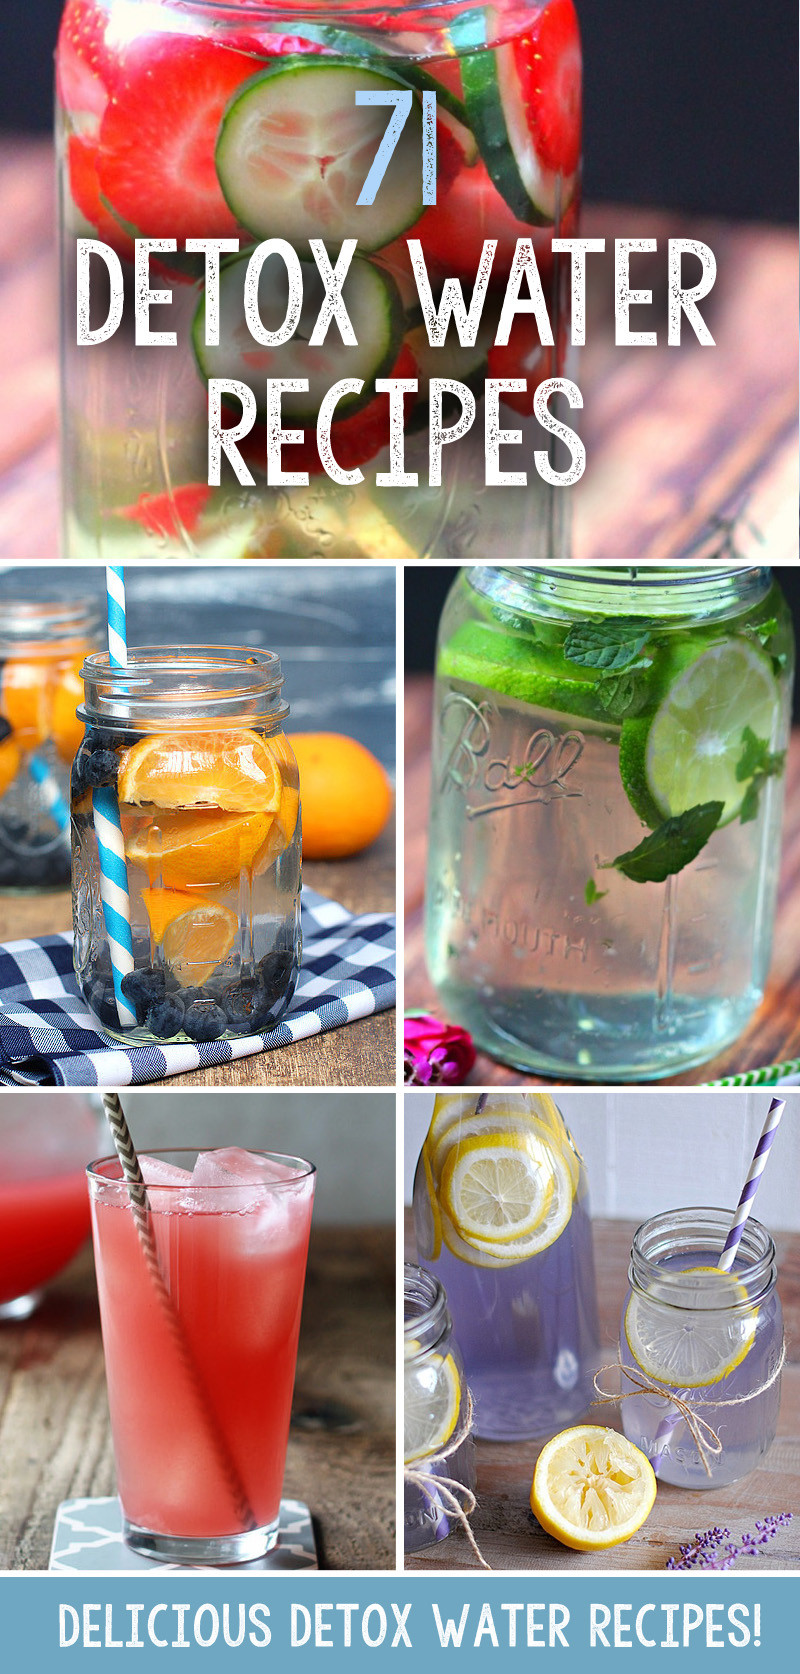 Weight Loss Detox Drinks Recipes
 71 Delicious Detox Water Recipes To Help You Lose Weight Fast